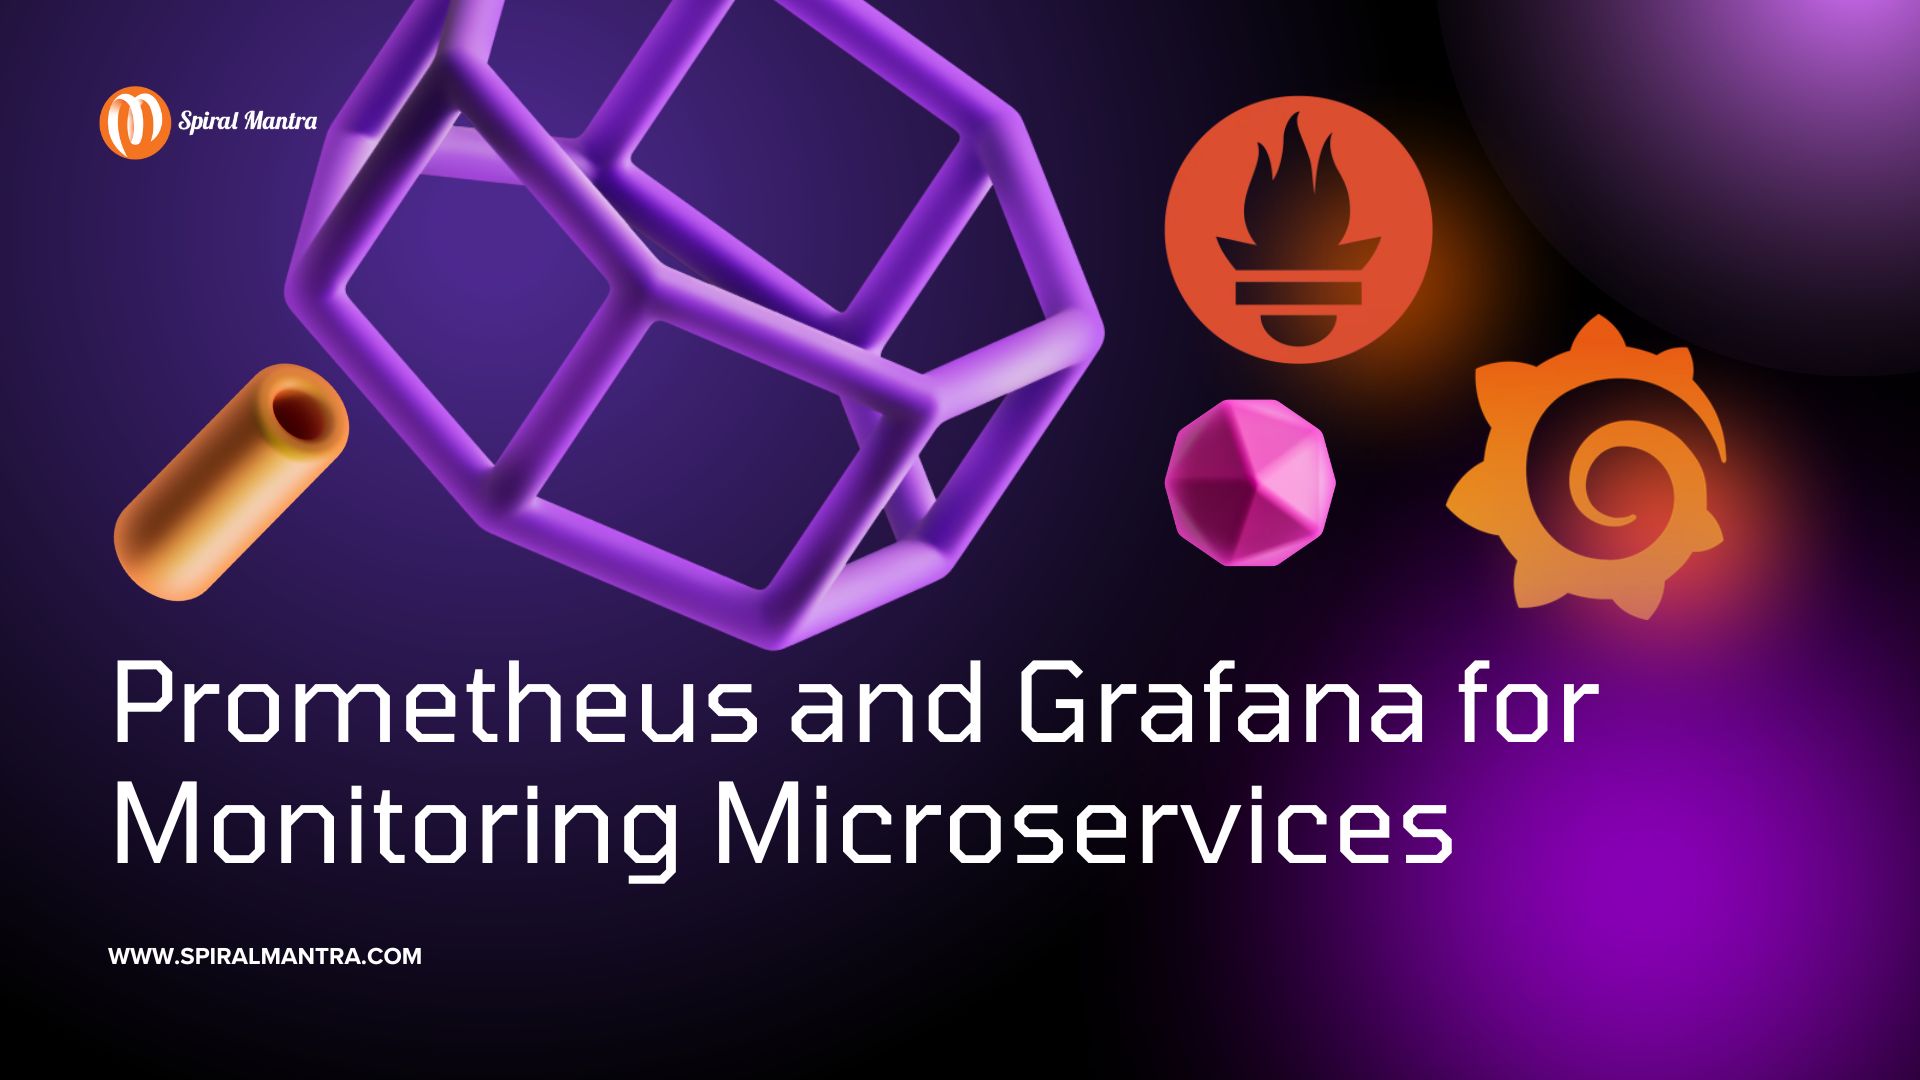 Why to use Prometheus and Grafana for Monitoring Microservices